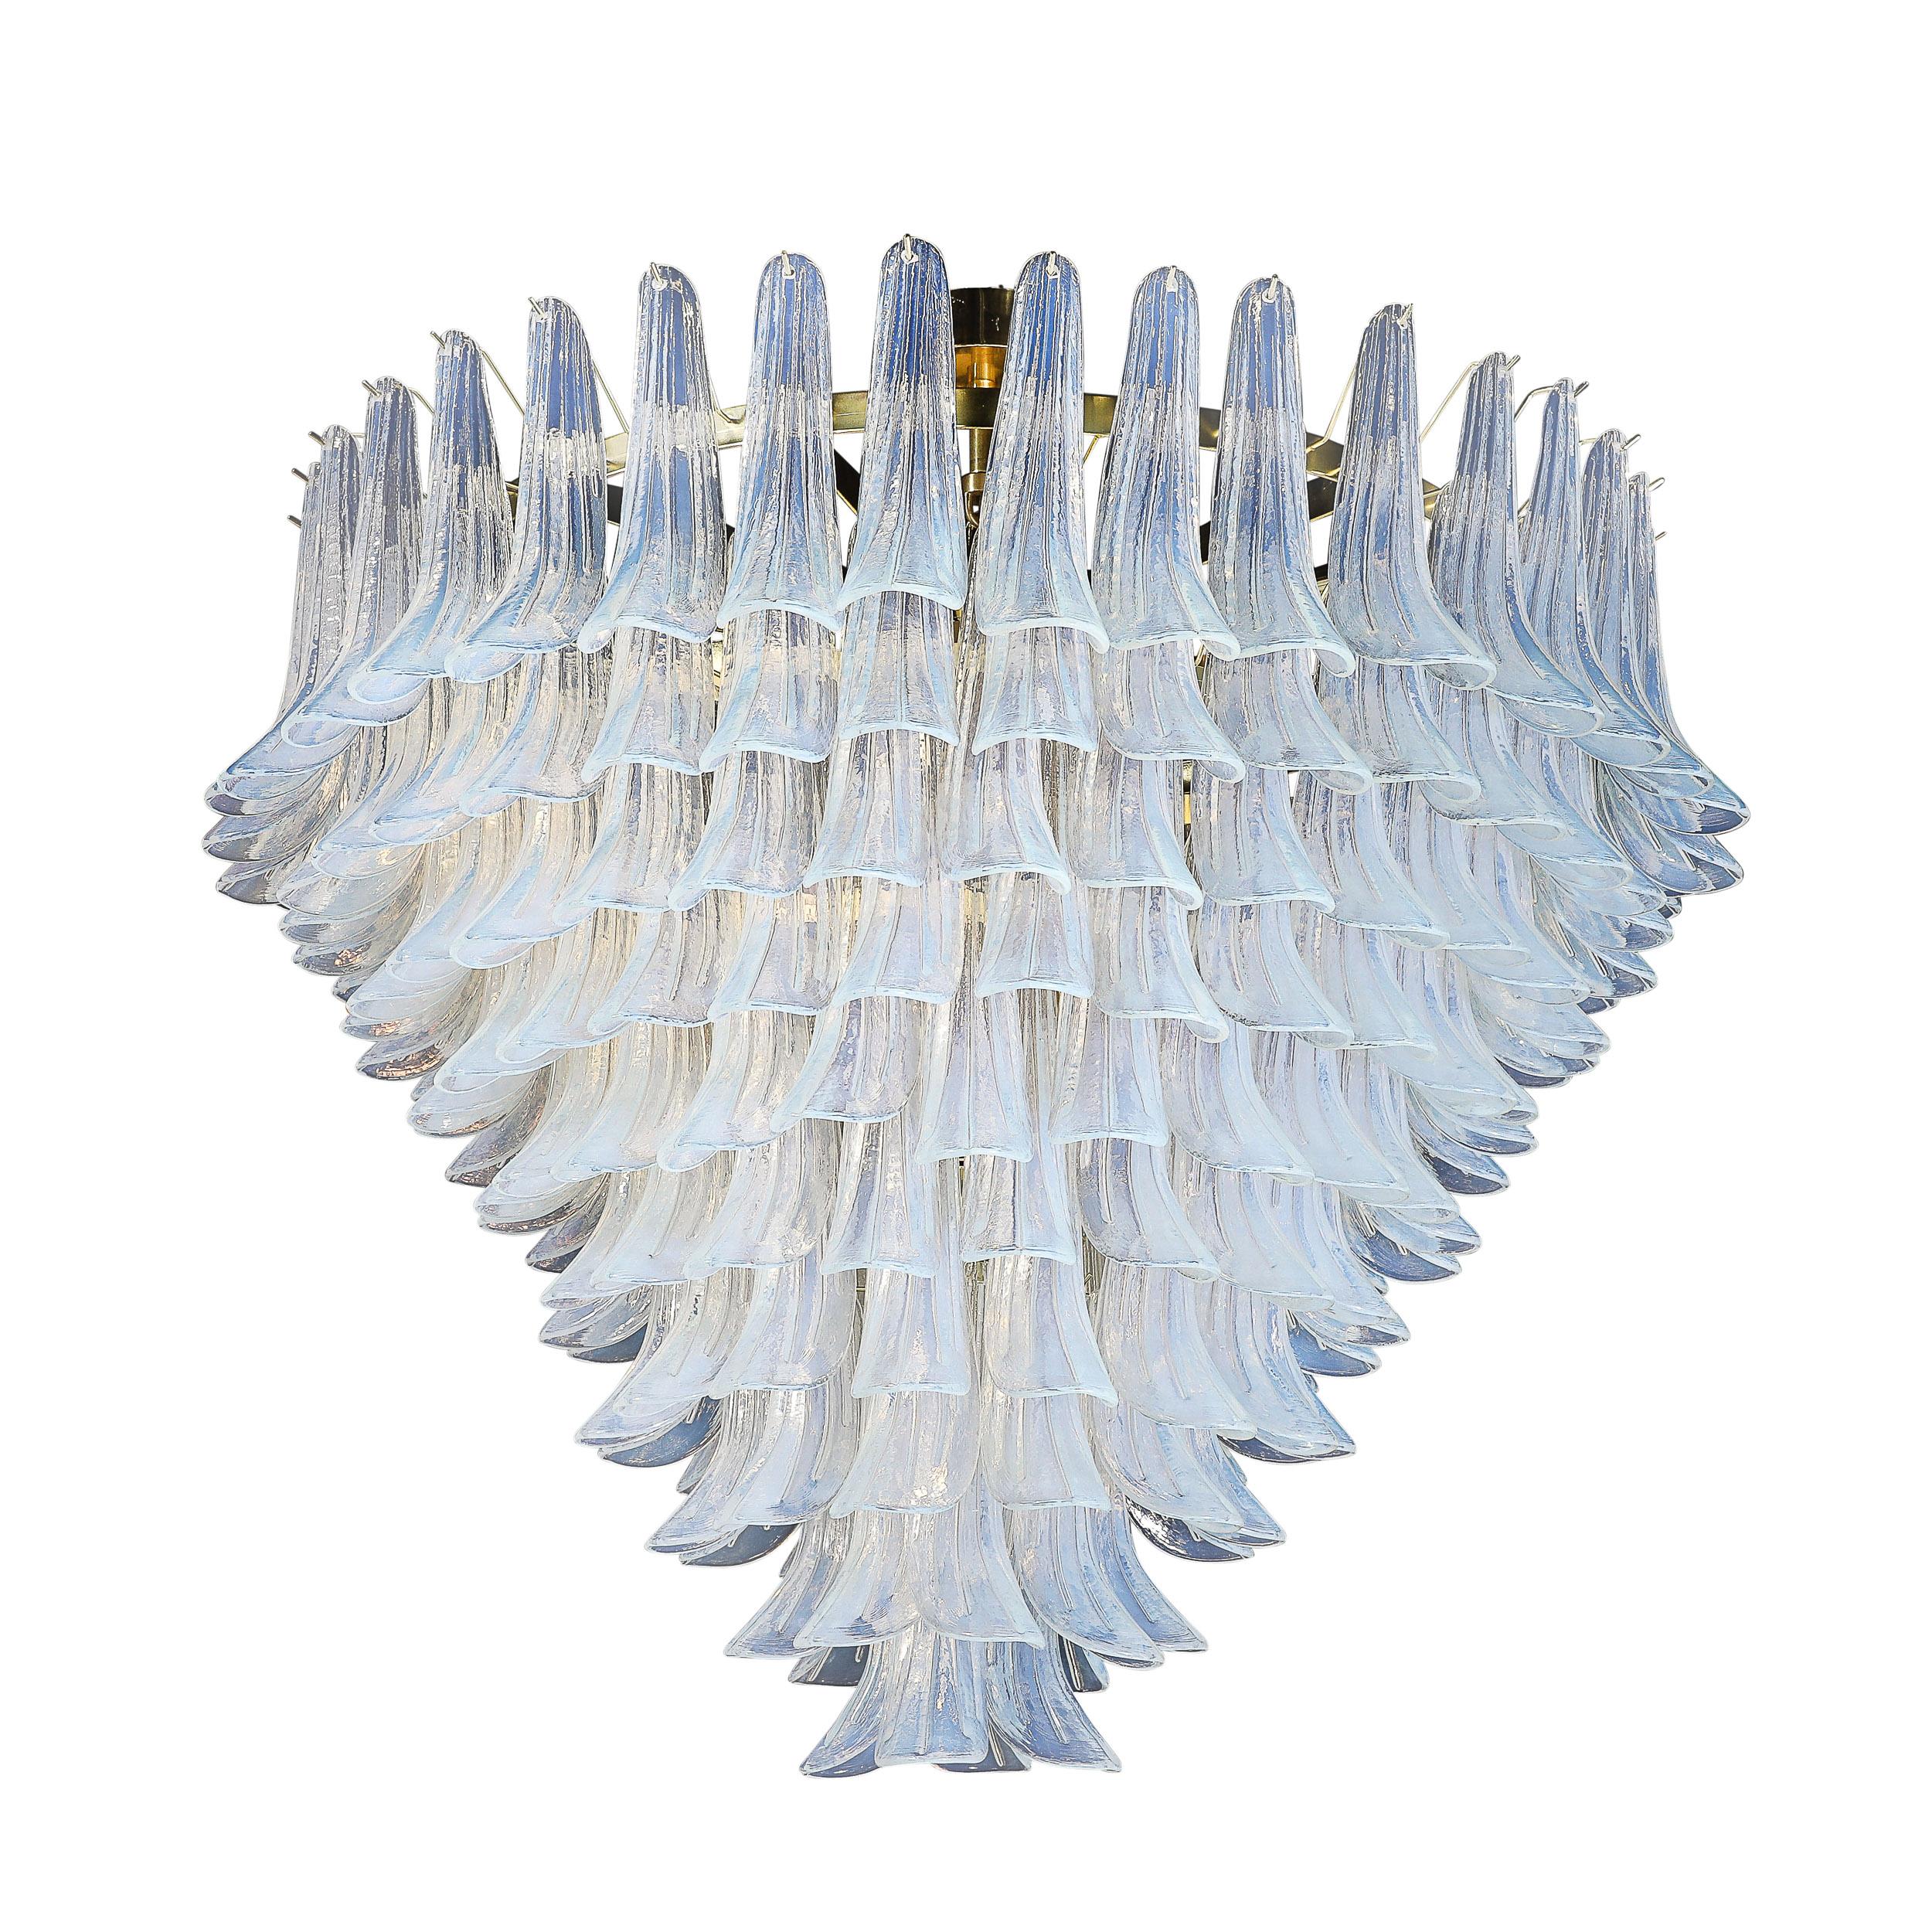 This stunning Modernist Hand-Blown Iridescent Murano Glass Feather Chandelier with Brass Fittings originates from Italy, Circa 2000. Features 10 tiers of iridescent feather glass. These beautifully spaced individual elements are tapered at their